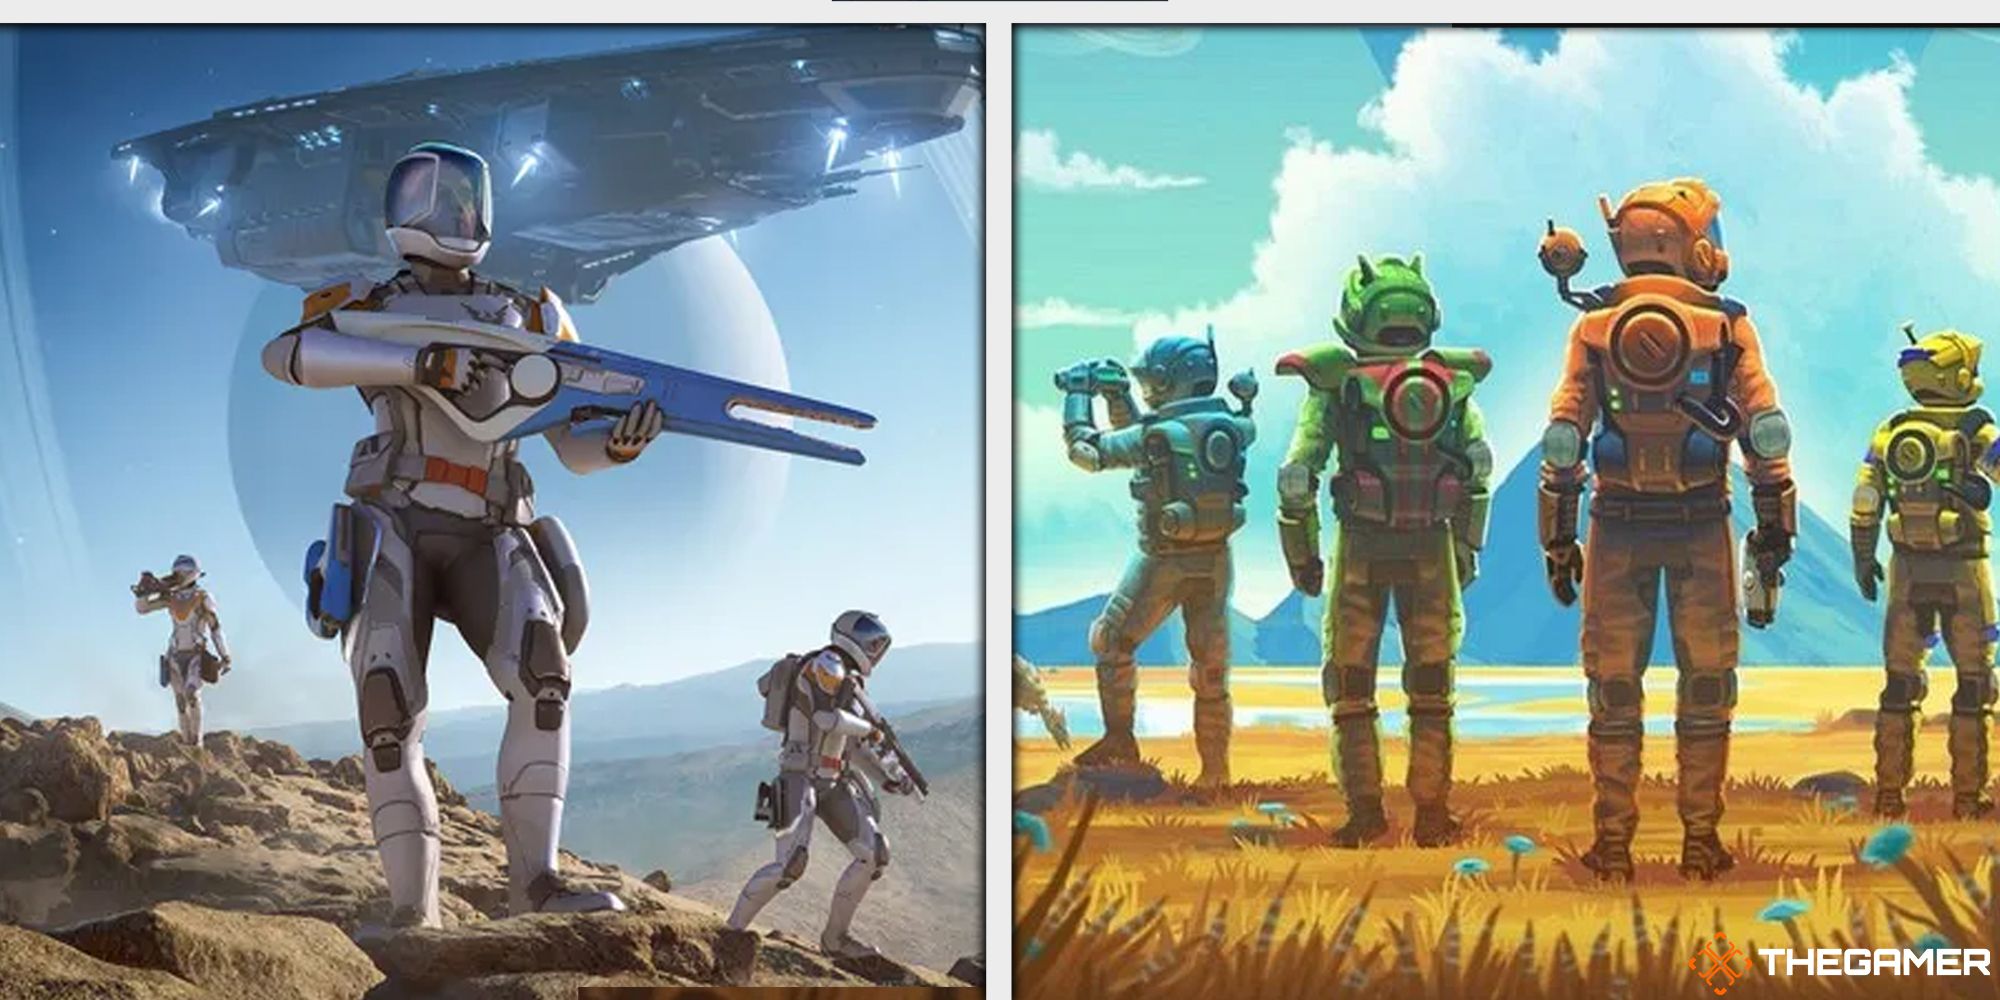 No Man's Sky Vs. Elite Dangerous: Which Game Is Better?